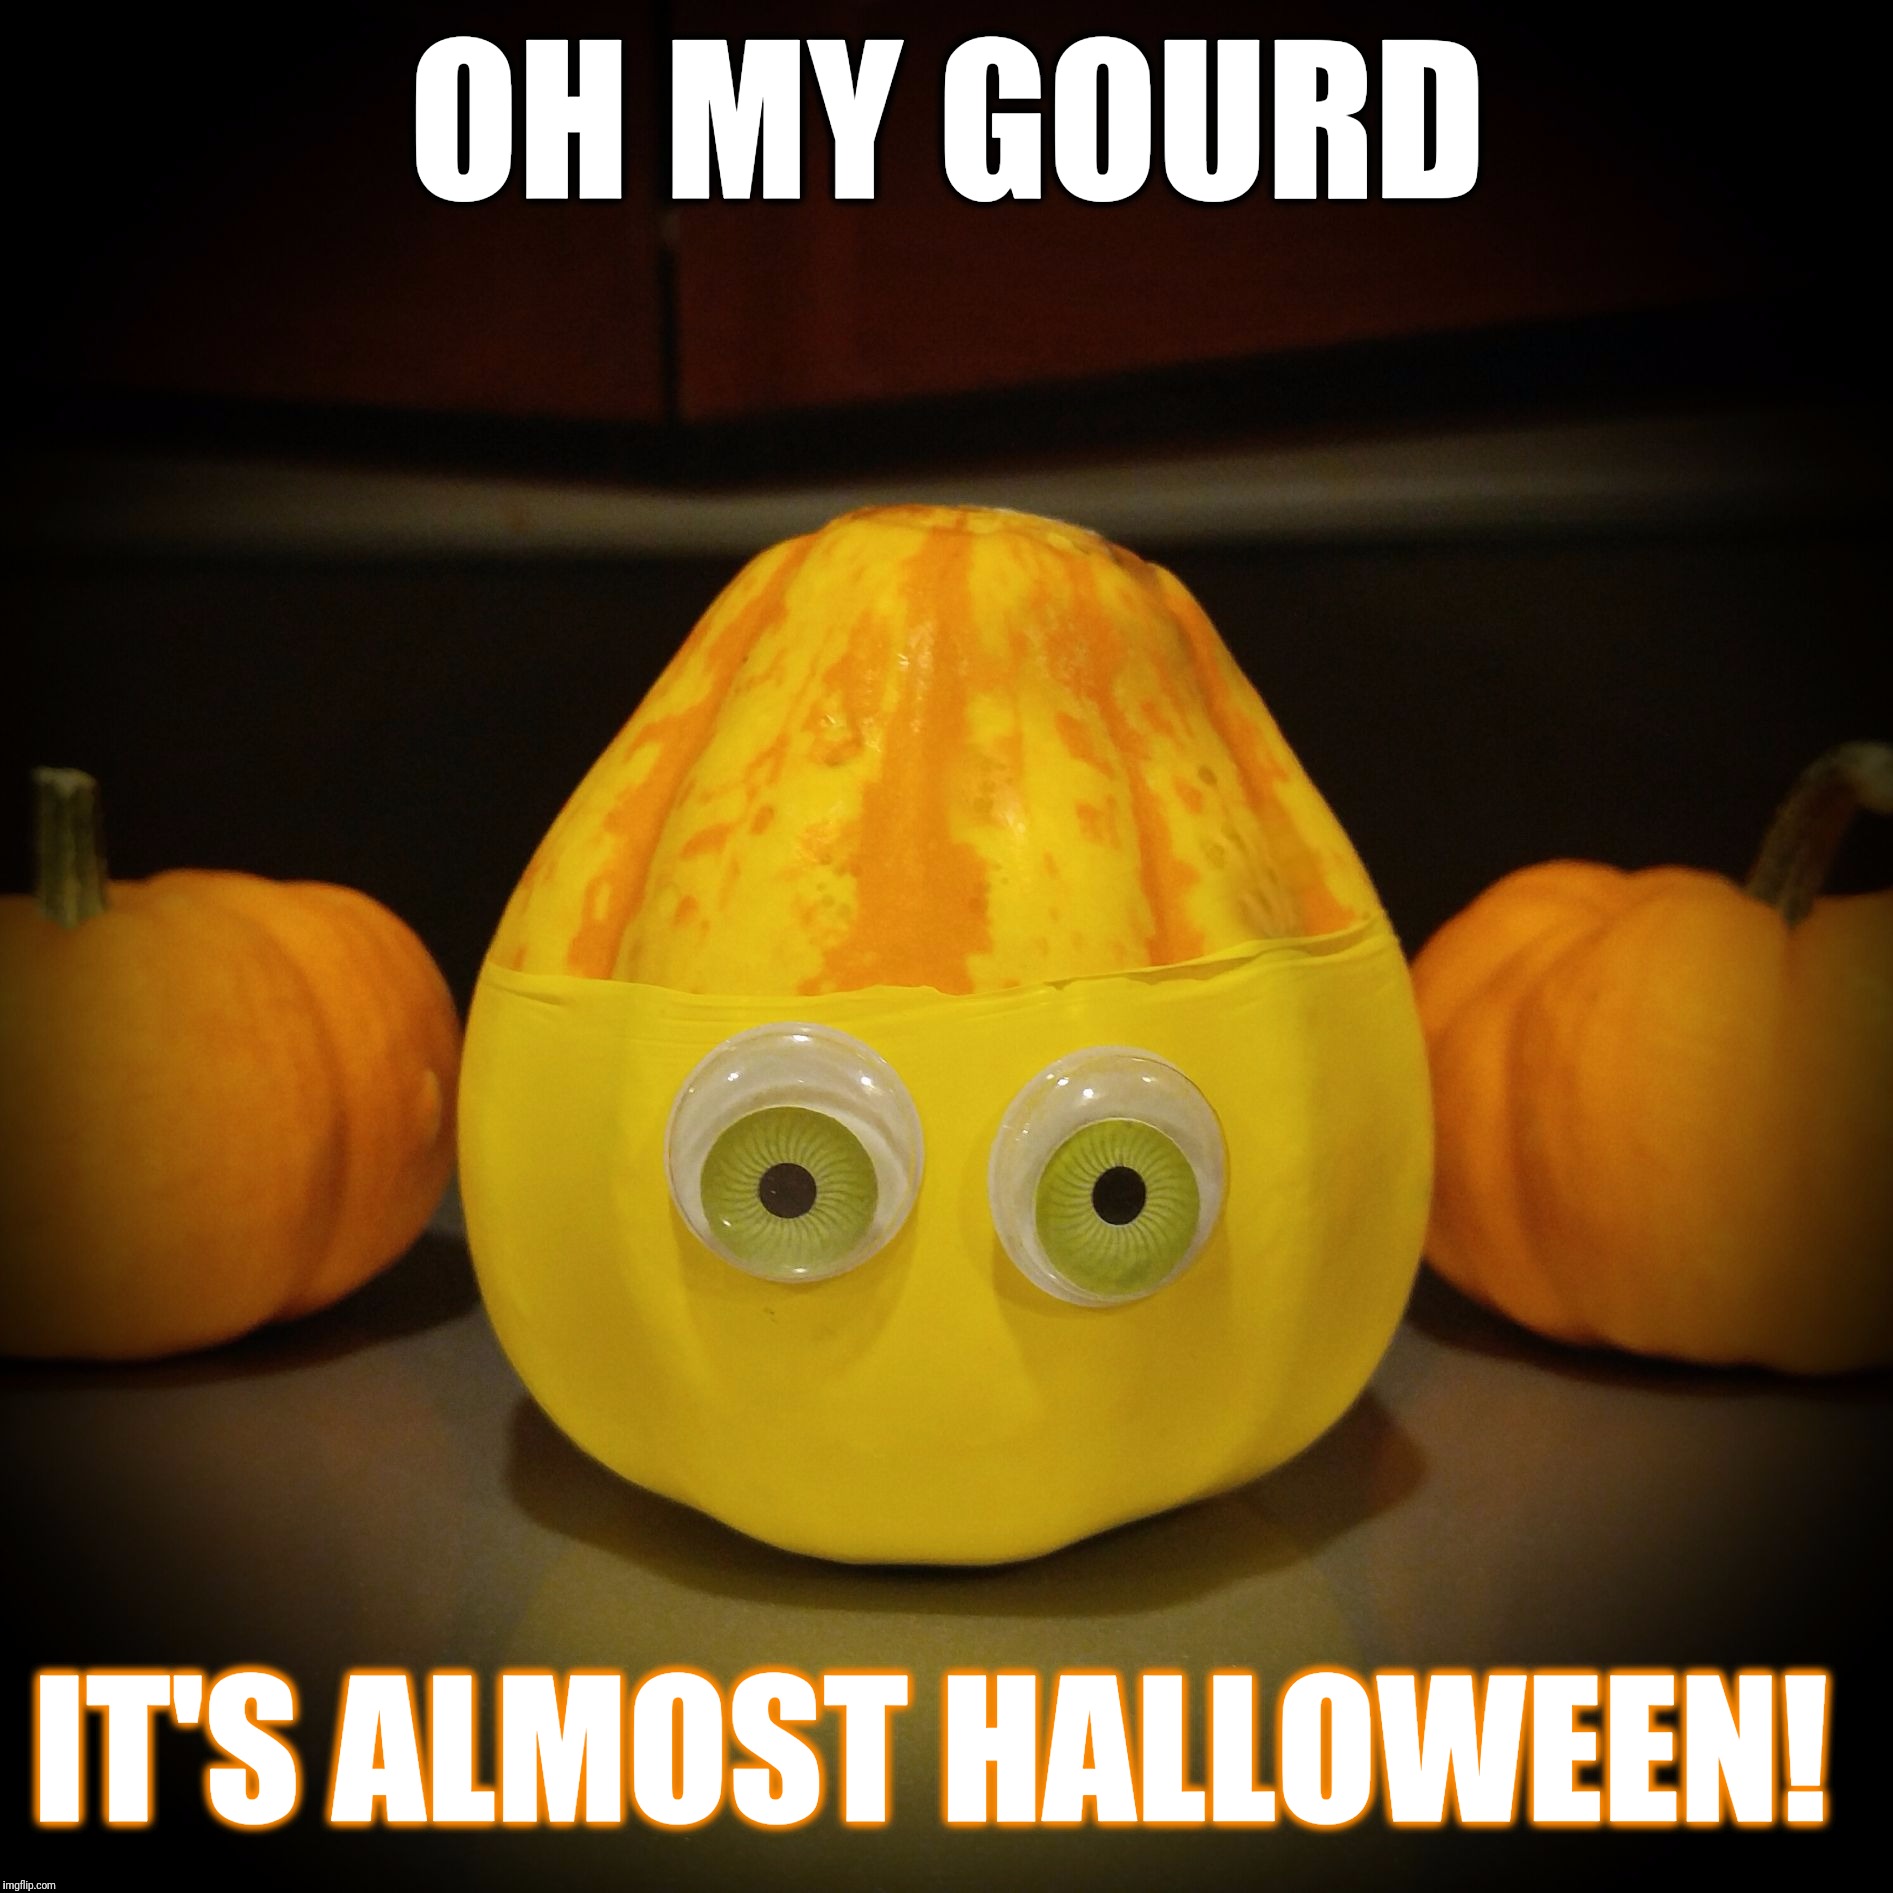 Oh my GOURD, it's almost Halloween!  |  OH MY GOURD; IT'S ALMOST HALLOWEEN! | image tagged in oh my gourd,halloween,funny,autumn,gourd,memes | made w/ Imgflip meme maker